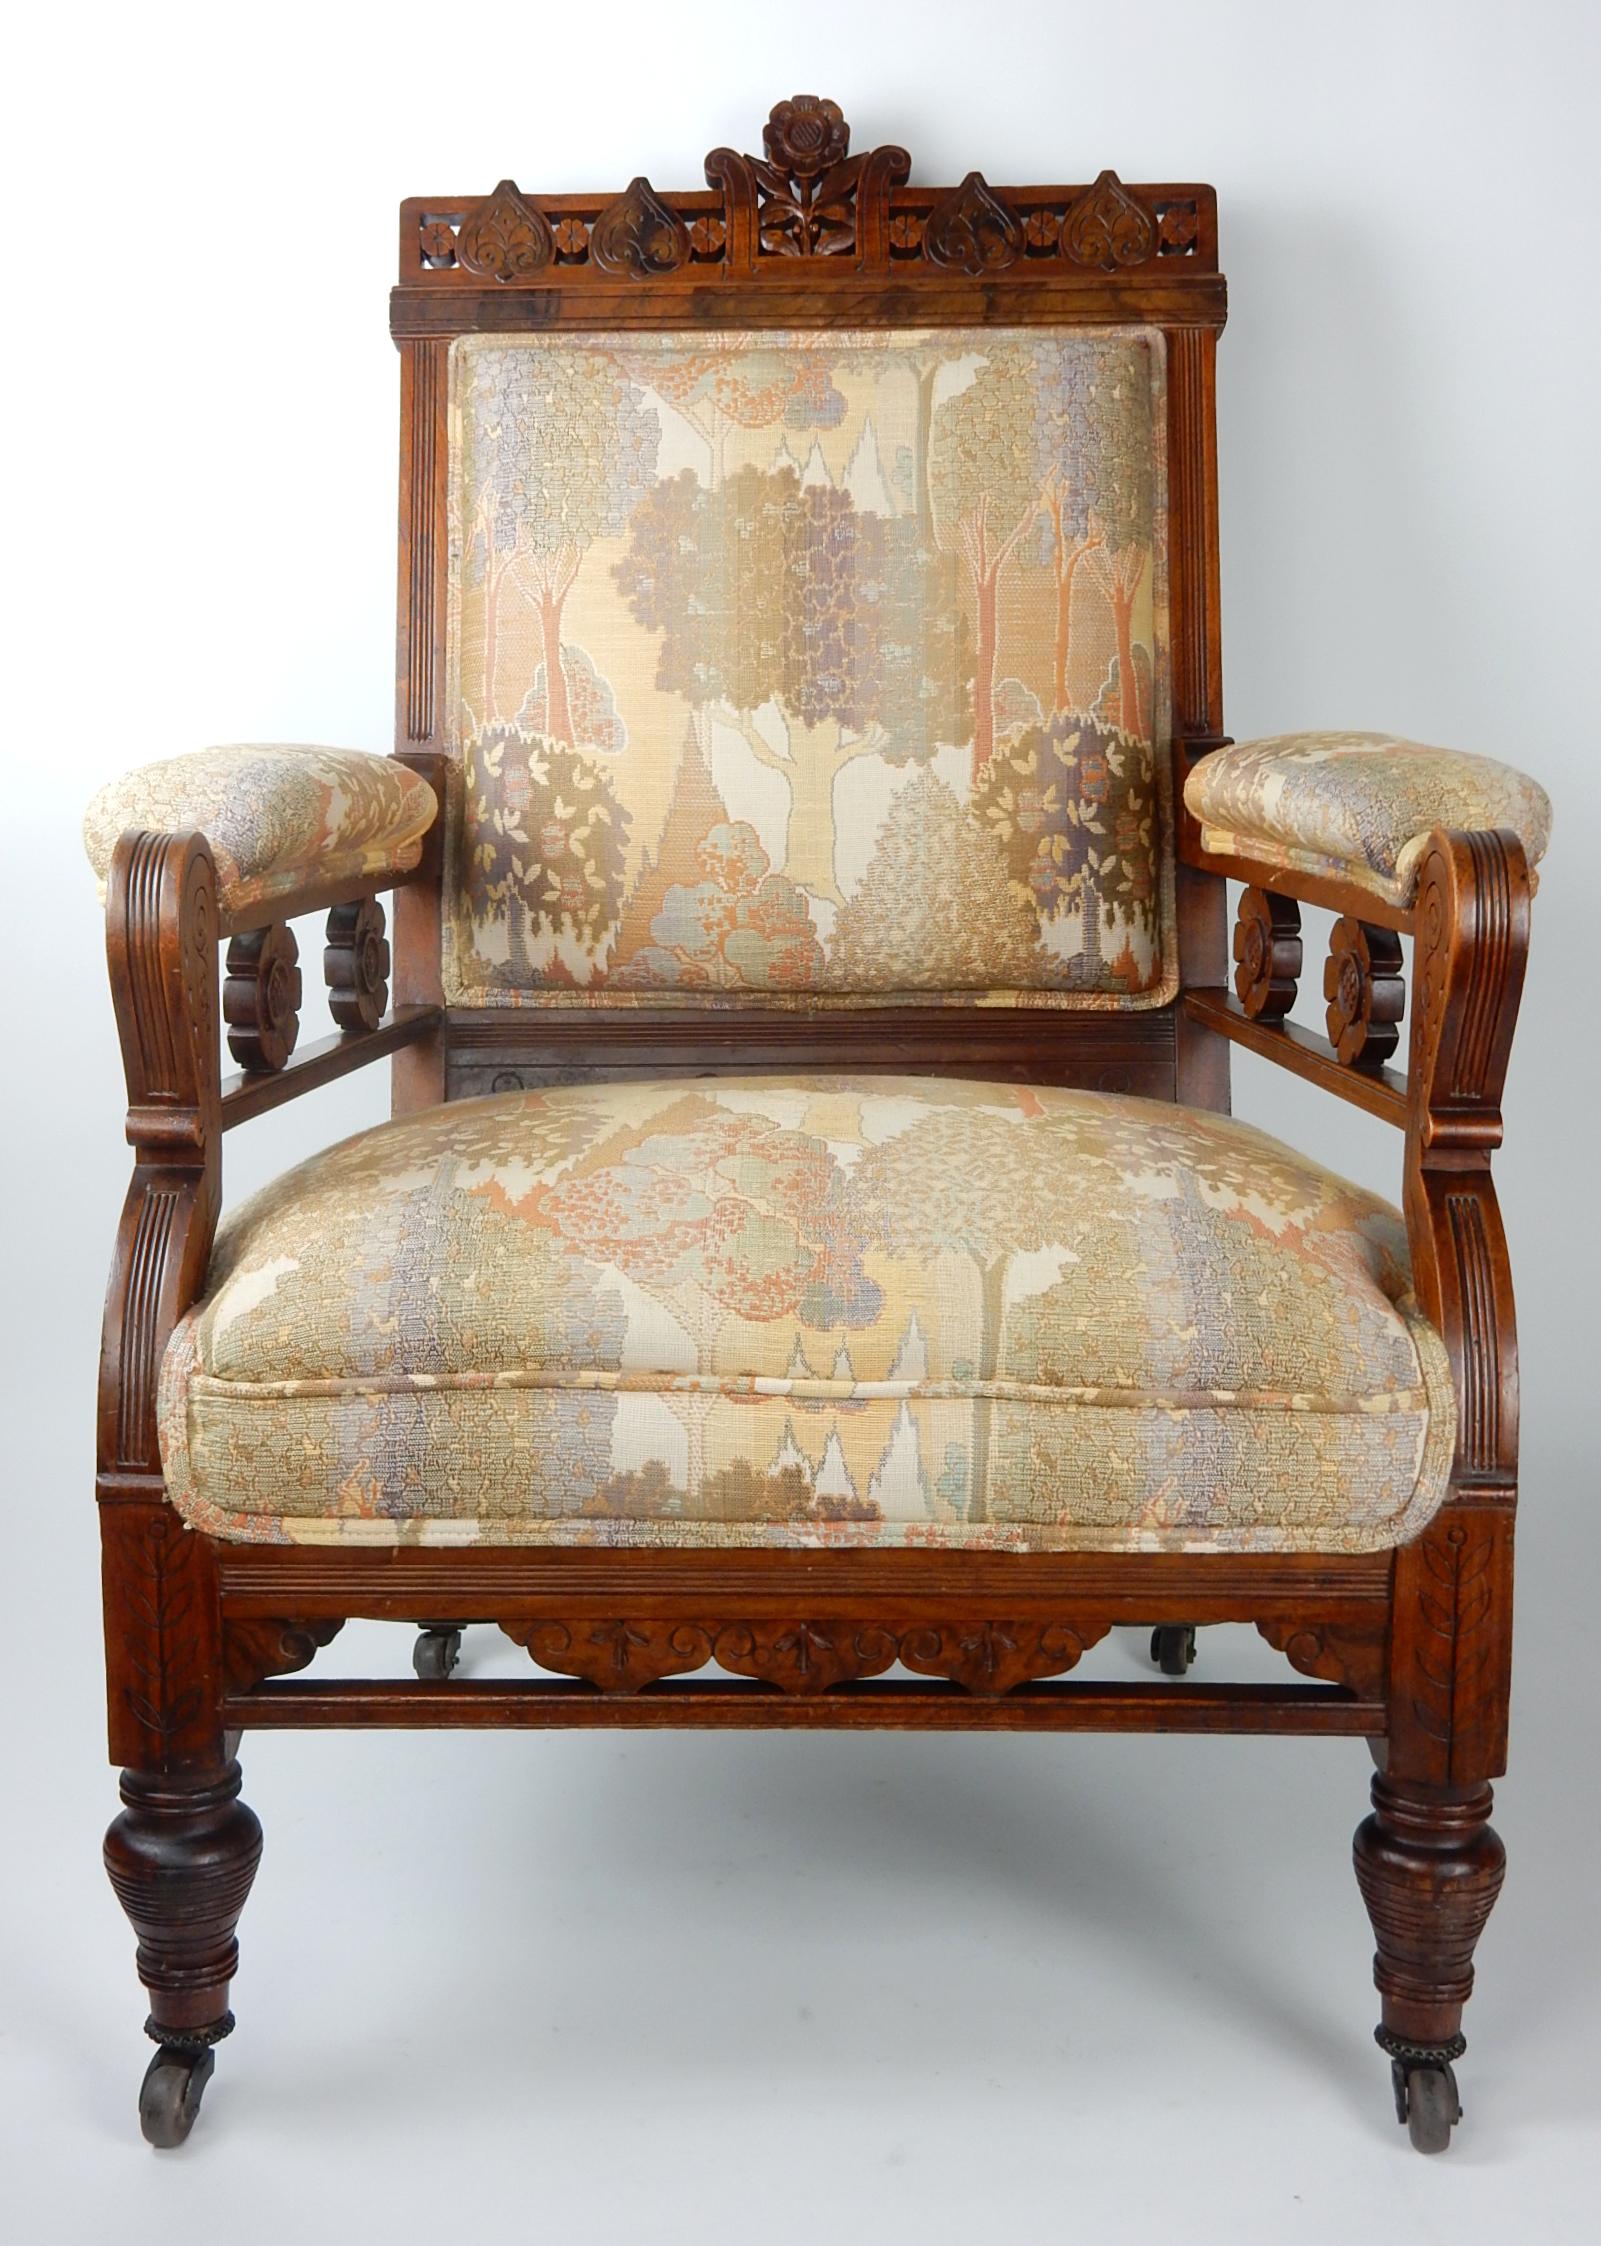 Late 19th century art chair with exquisitely carved floral design.
Upholstered in gorgeous Art Nouveau upholstery. 
Rolls on wooden casters. 
Solid chair with no alteration or repair.